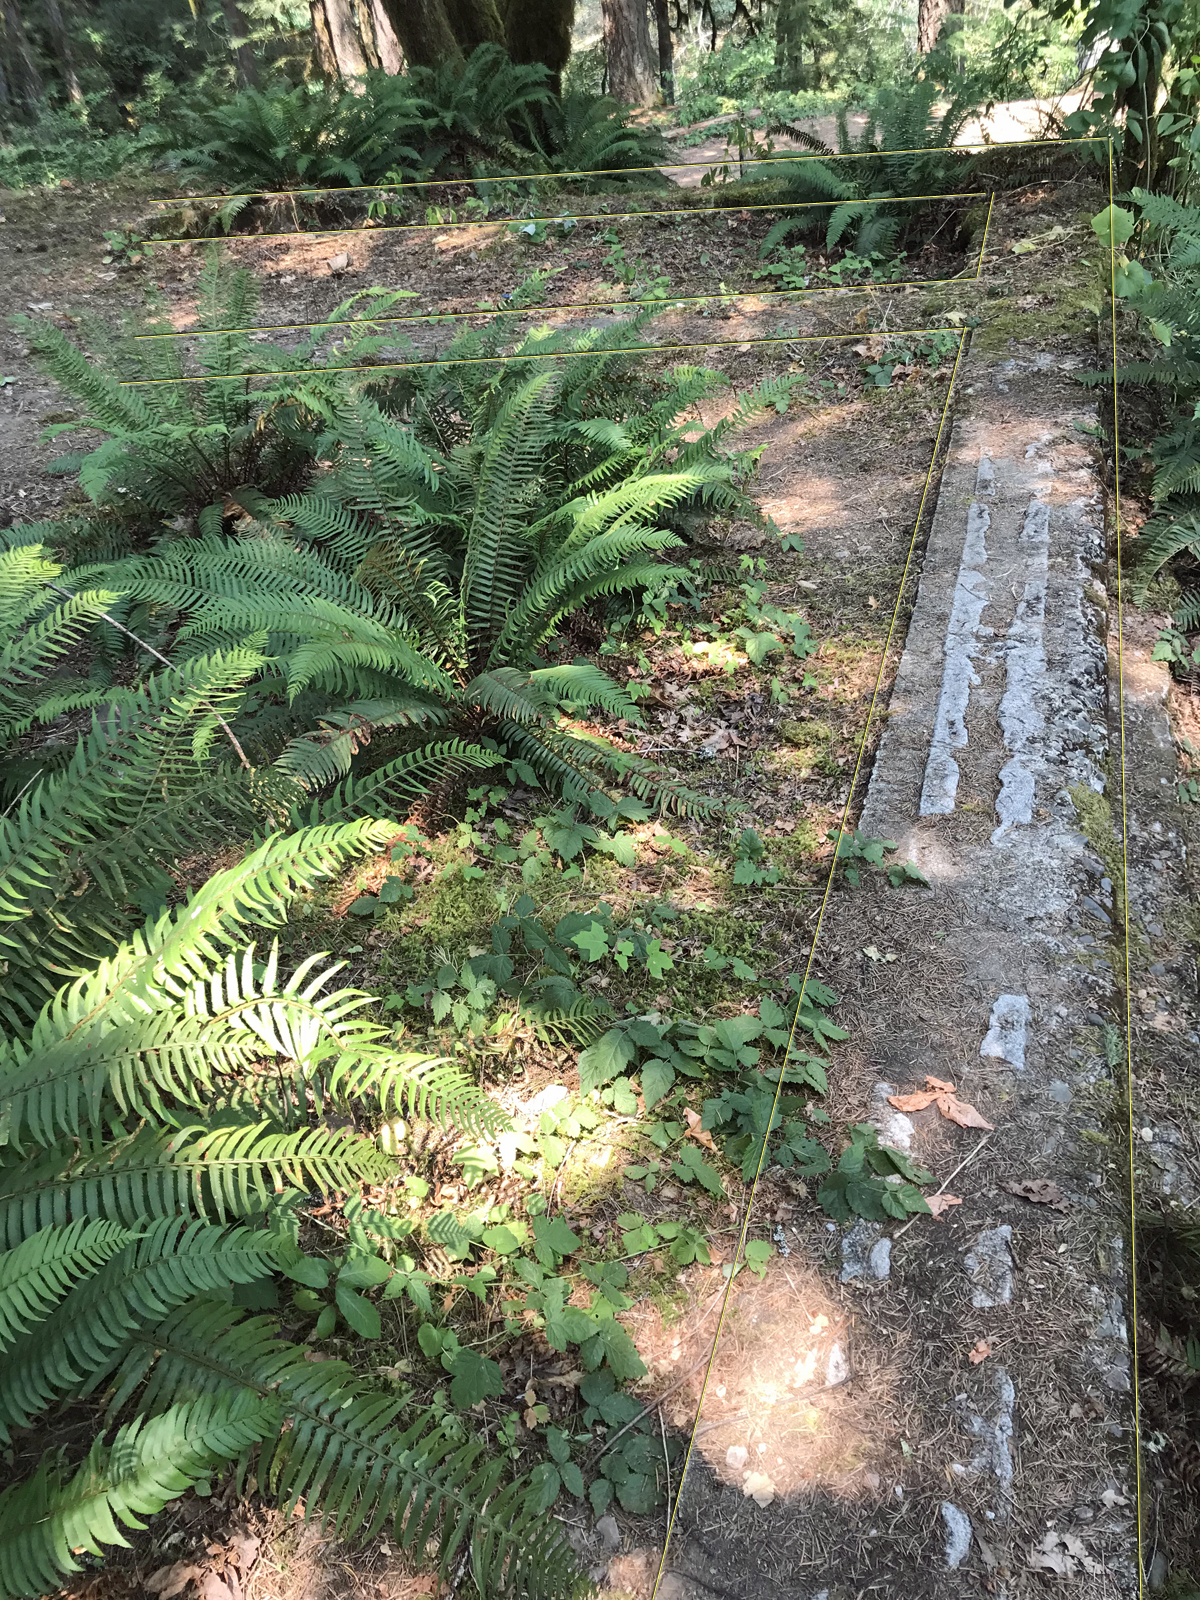 Remnants of a concrete foundation surrounded by ferns.